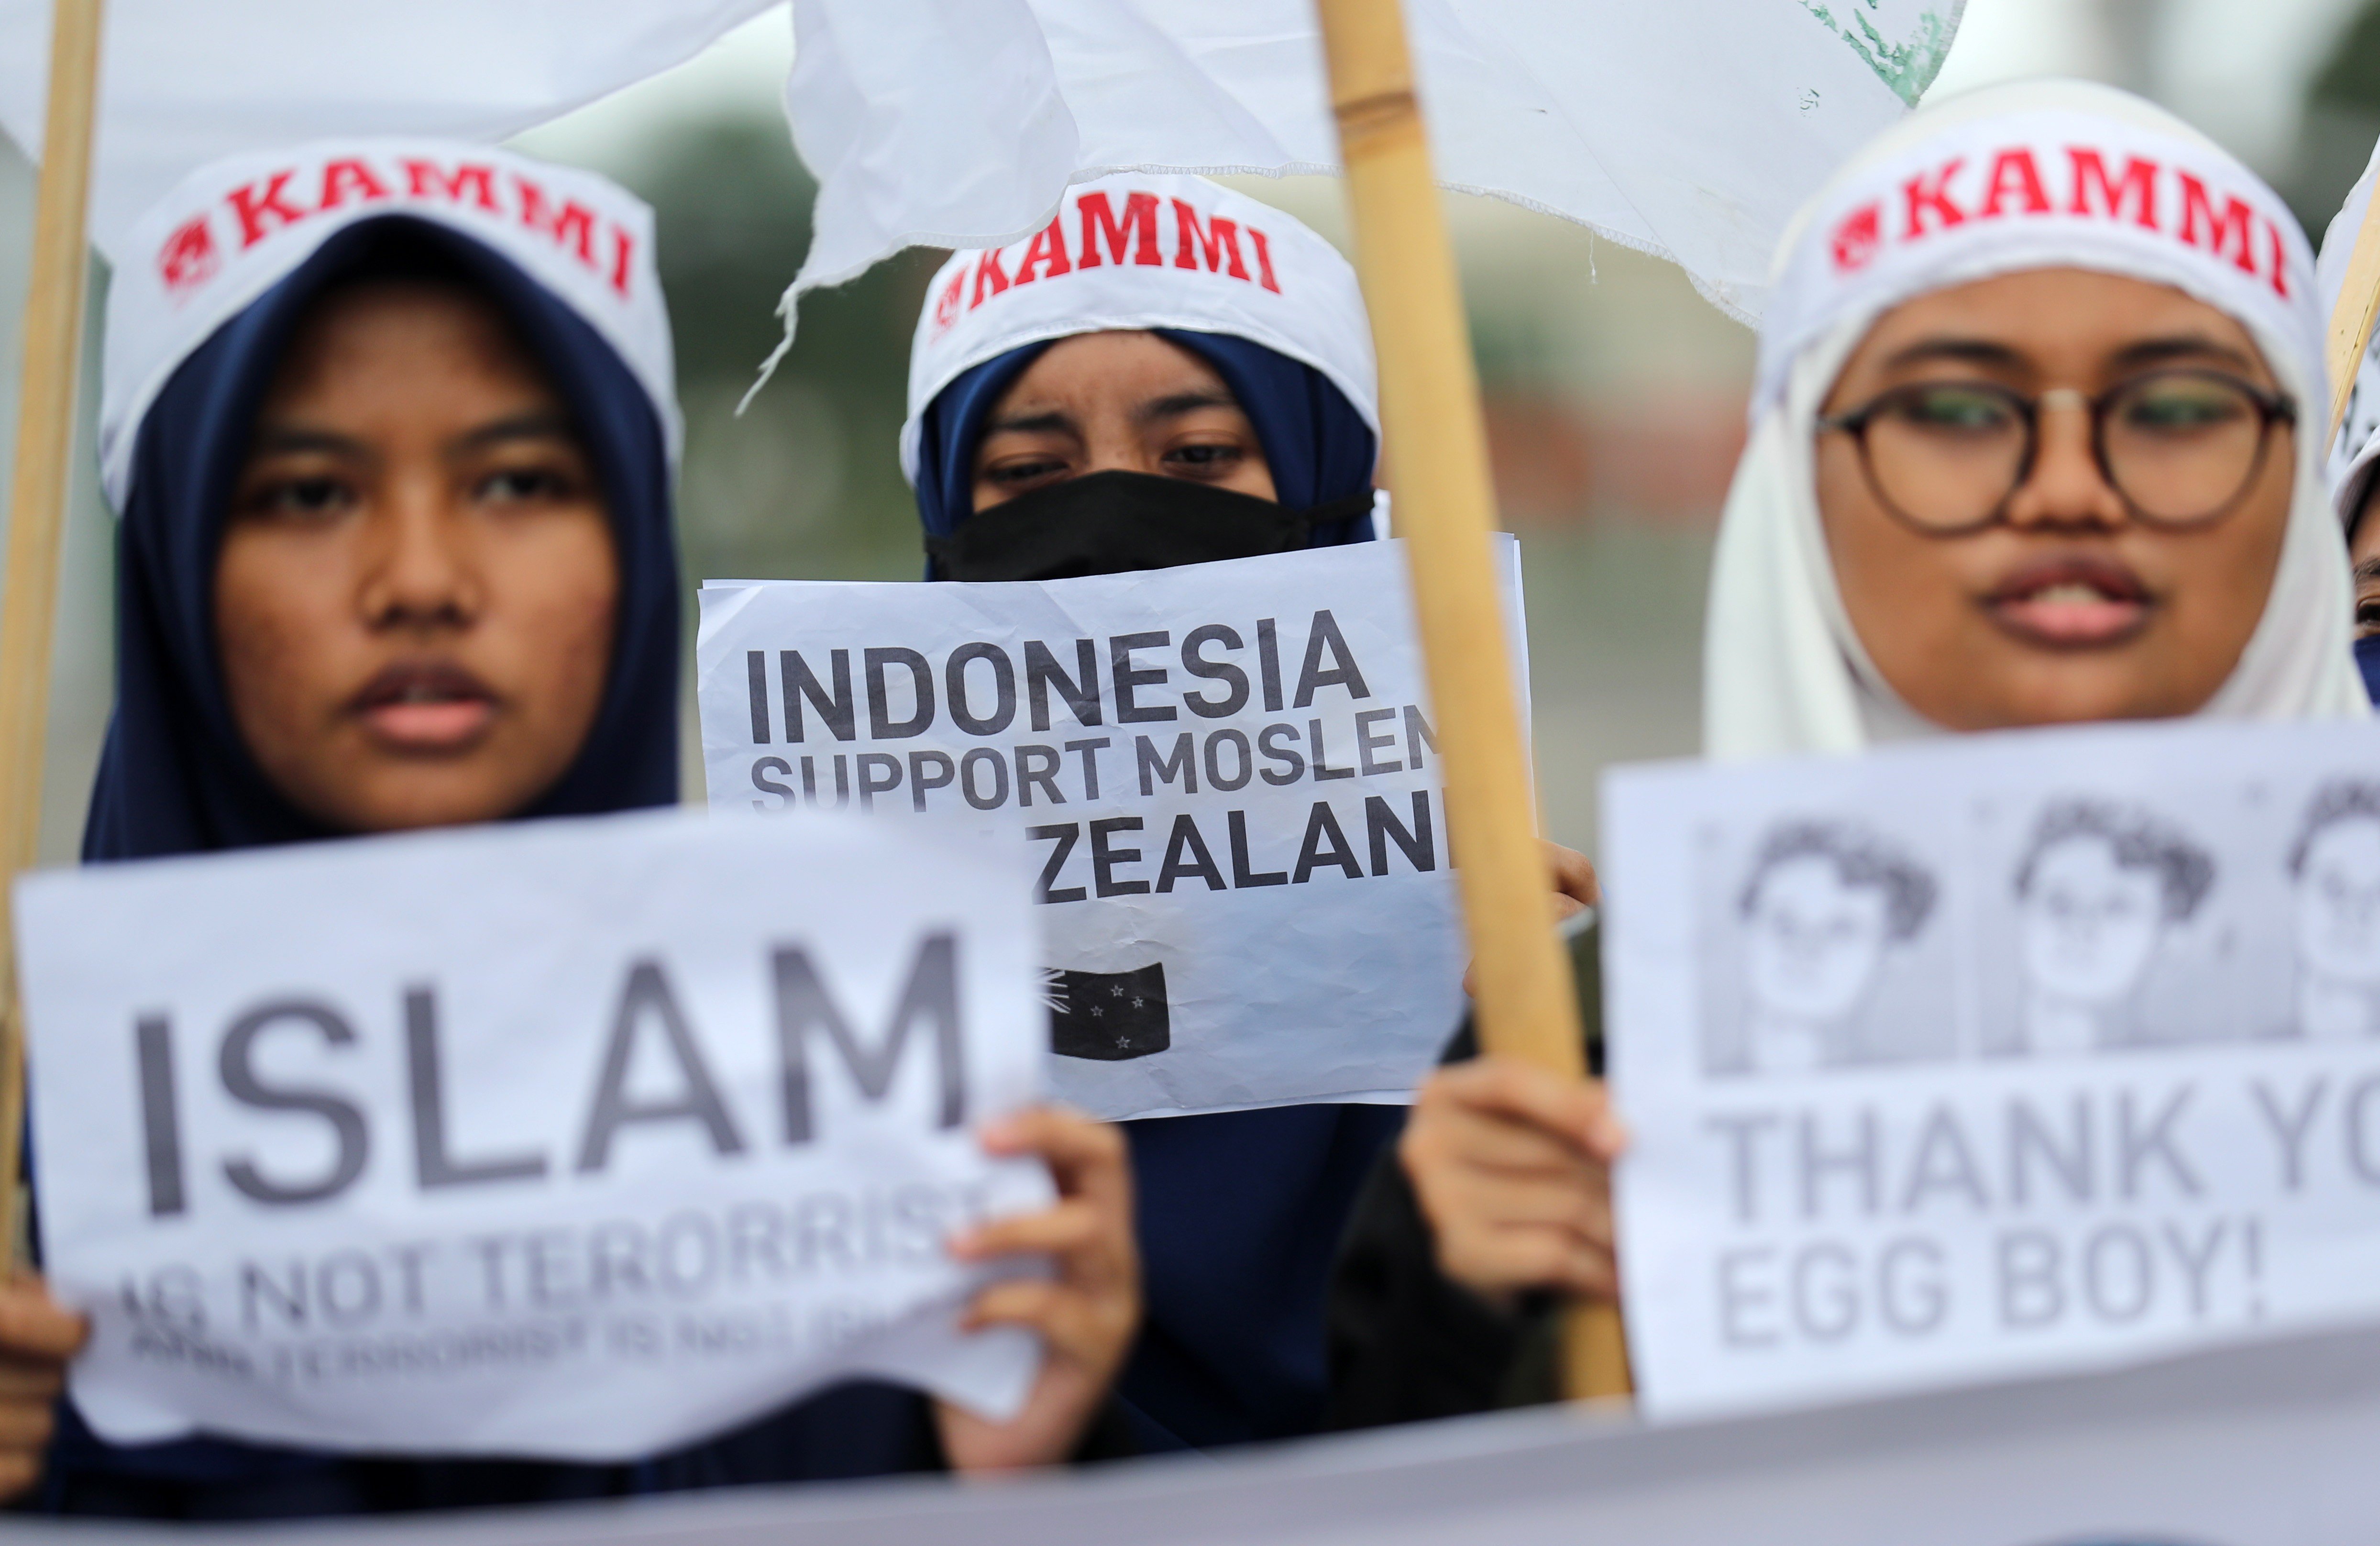 Indonesian Muslim students show their support for victims of the mosque shootings in New Zealand. Photo: EPA-EFE/Bagus Indahono